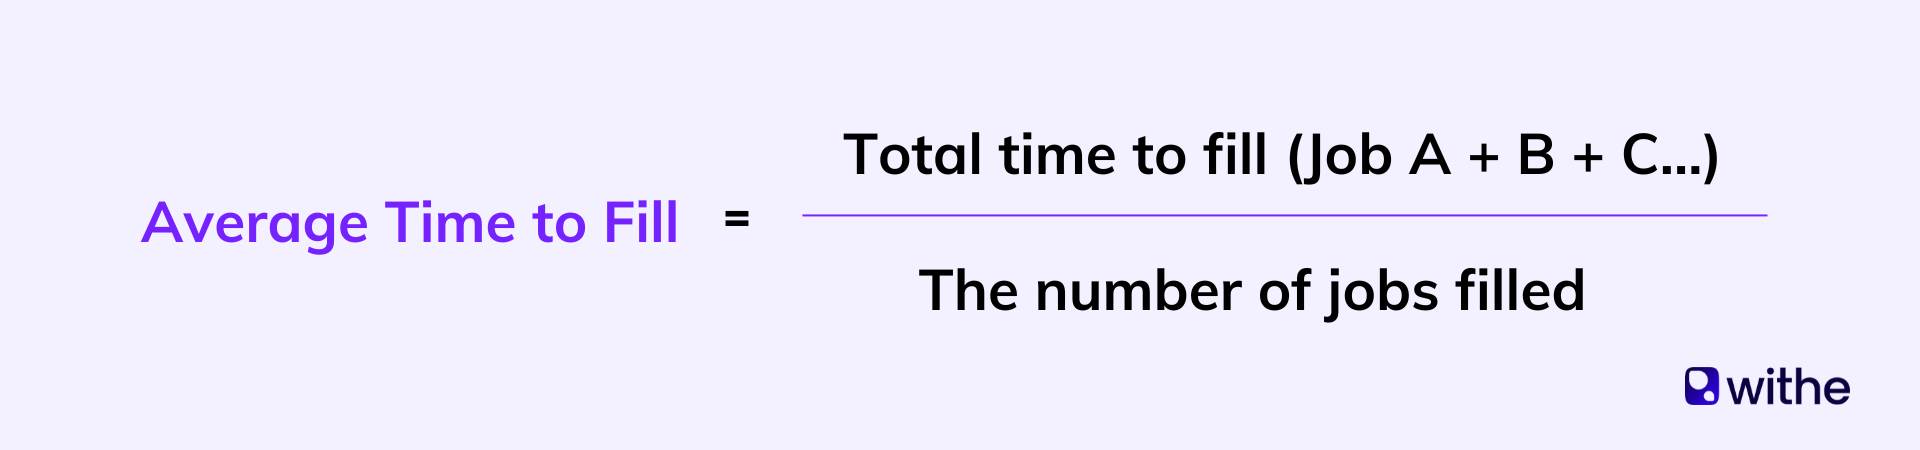 How to calculate average time to fill